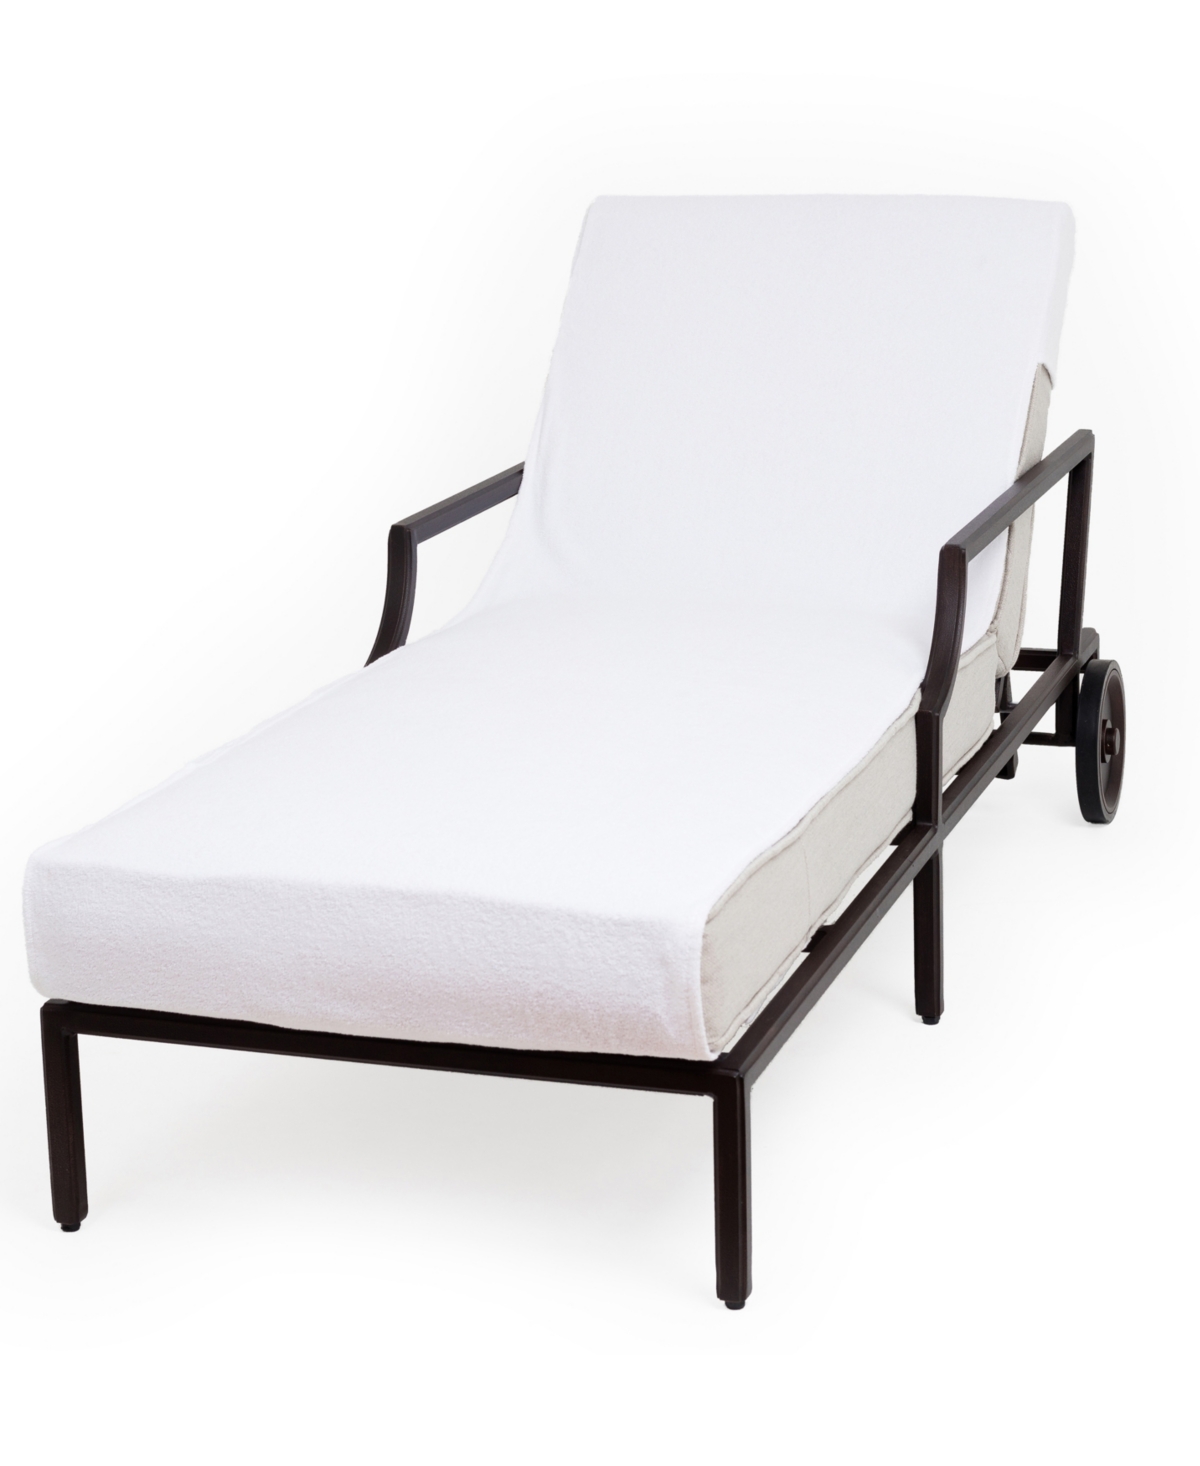 UPC 857723002107 product image for Linum Home Standard Size Chaise Lounge Cover Bedding | upcitemdb.com